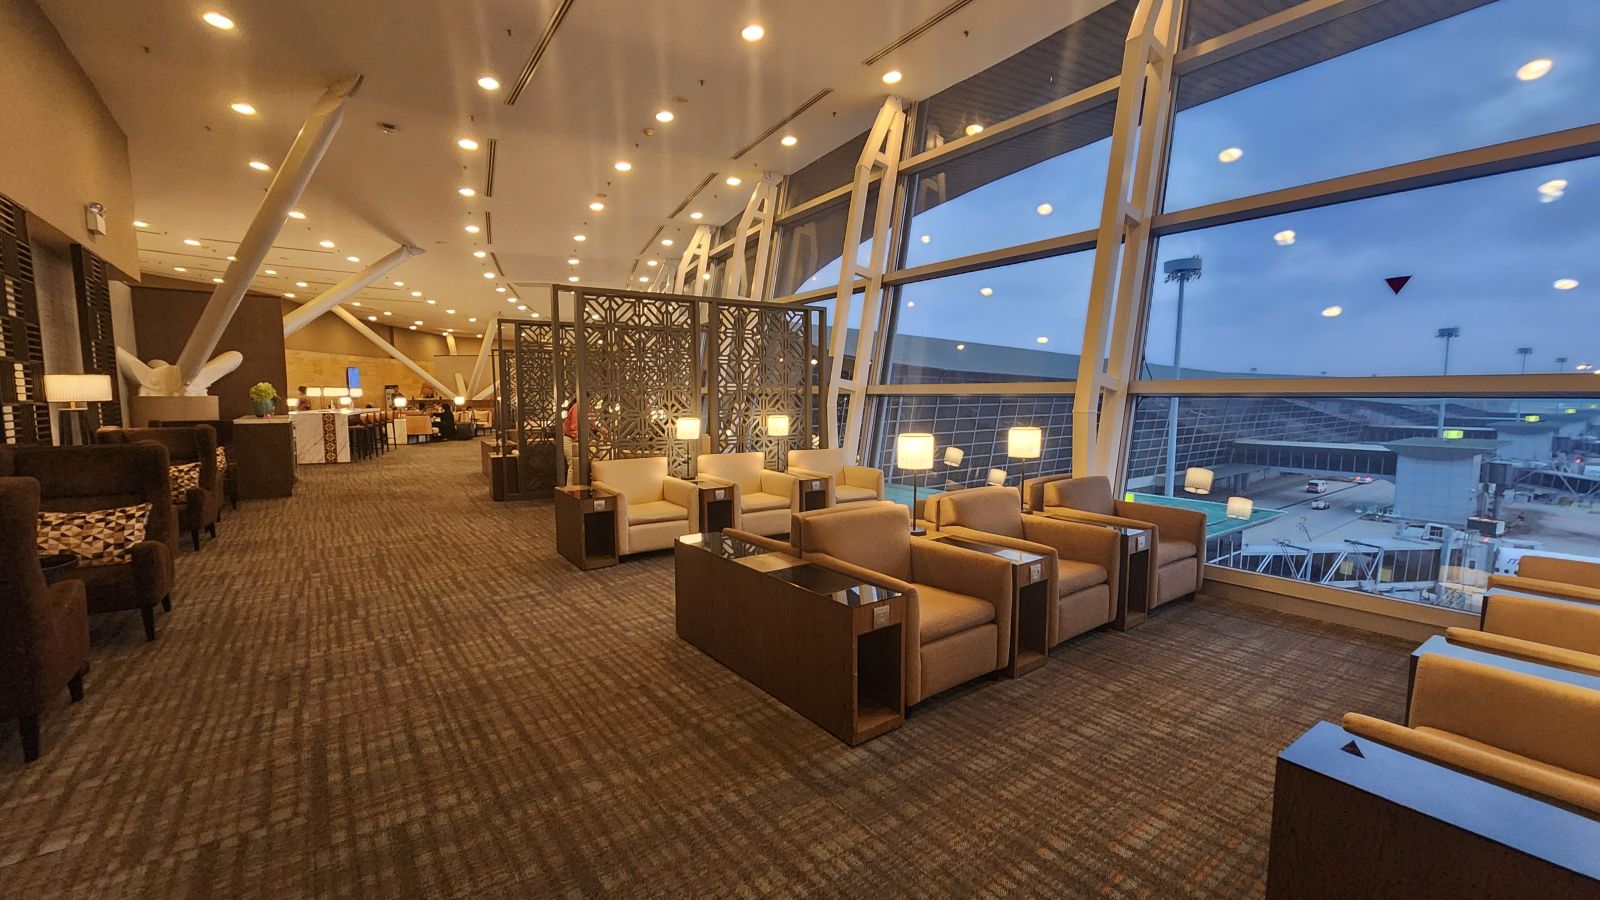 Malaysia Airlines Golden Lounge, KLIA